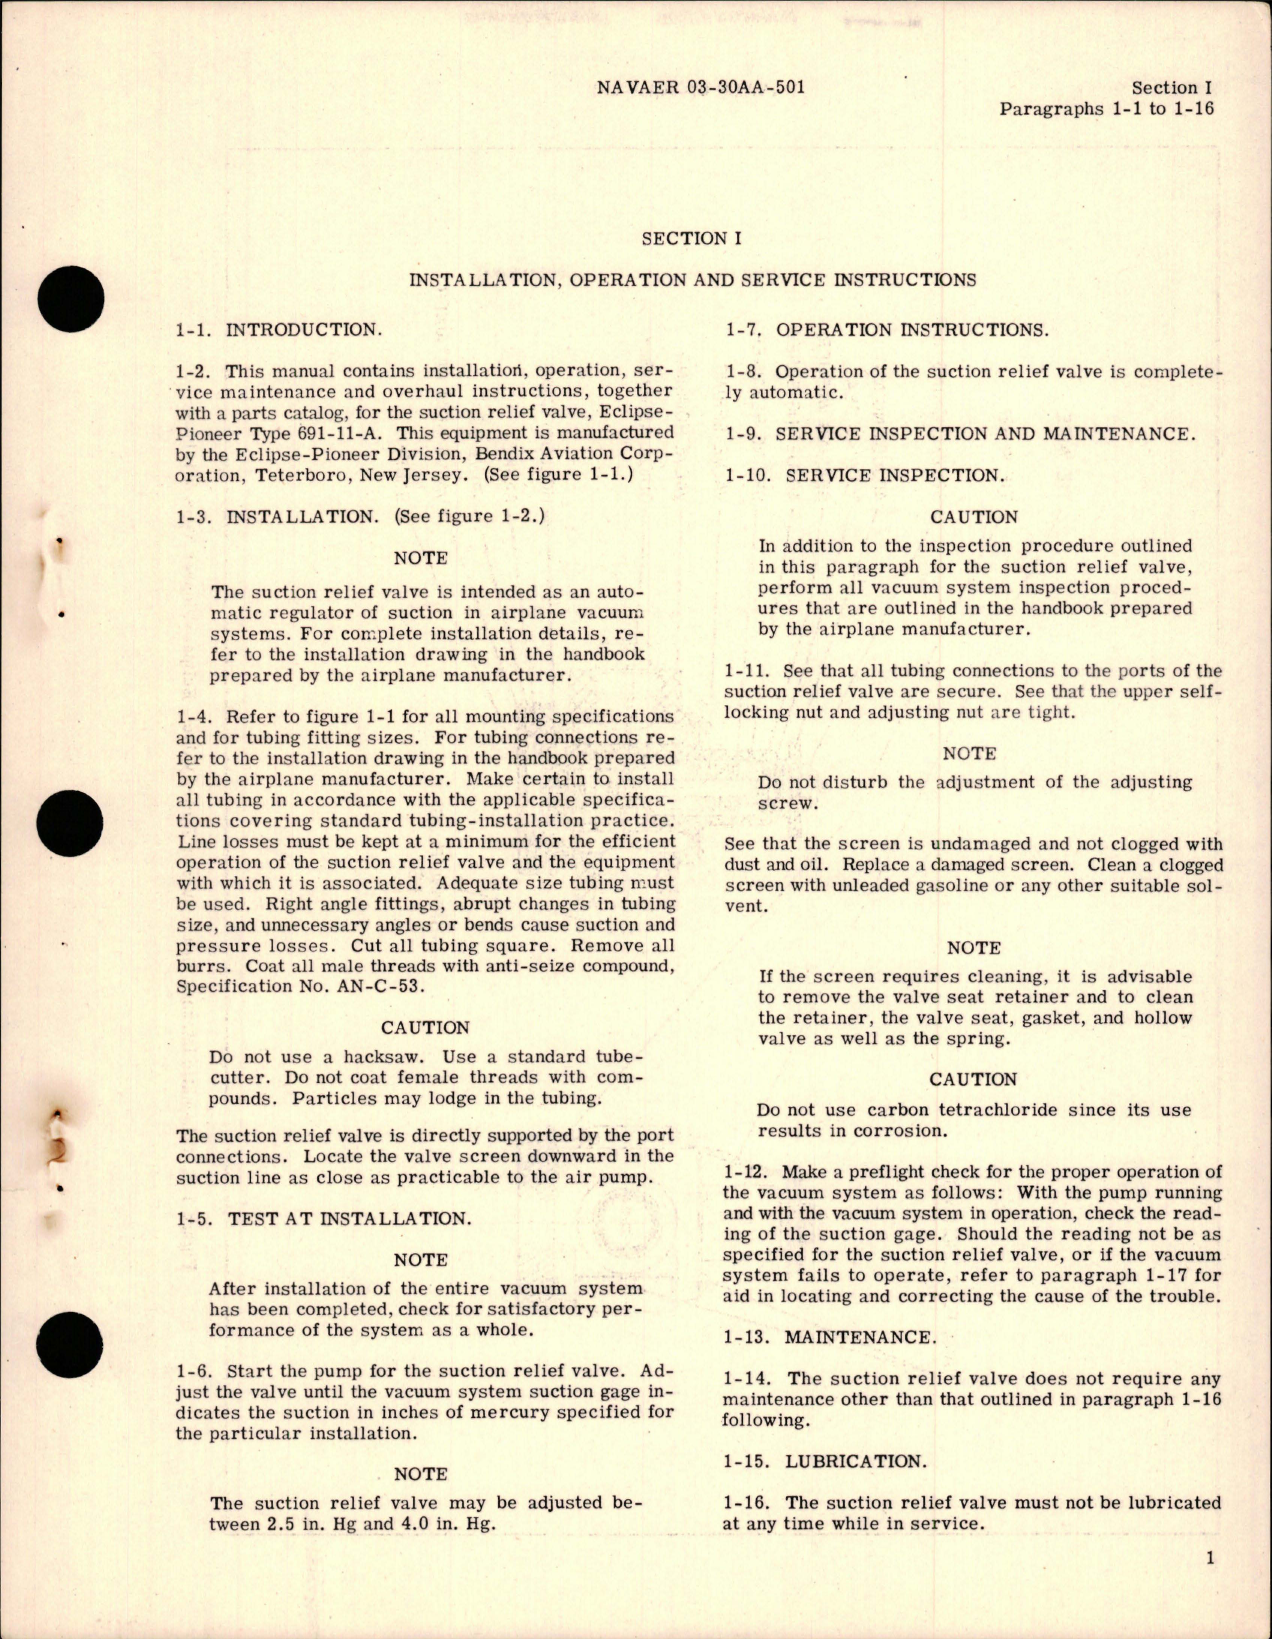 Sample page 5 from AirCorps Library document: Operation, Service and Overhaul Instructions with Parts Catalog for Suction Relief Valve - Model 691-11-A